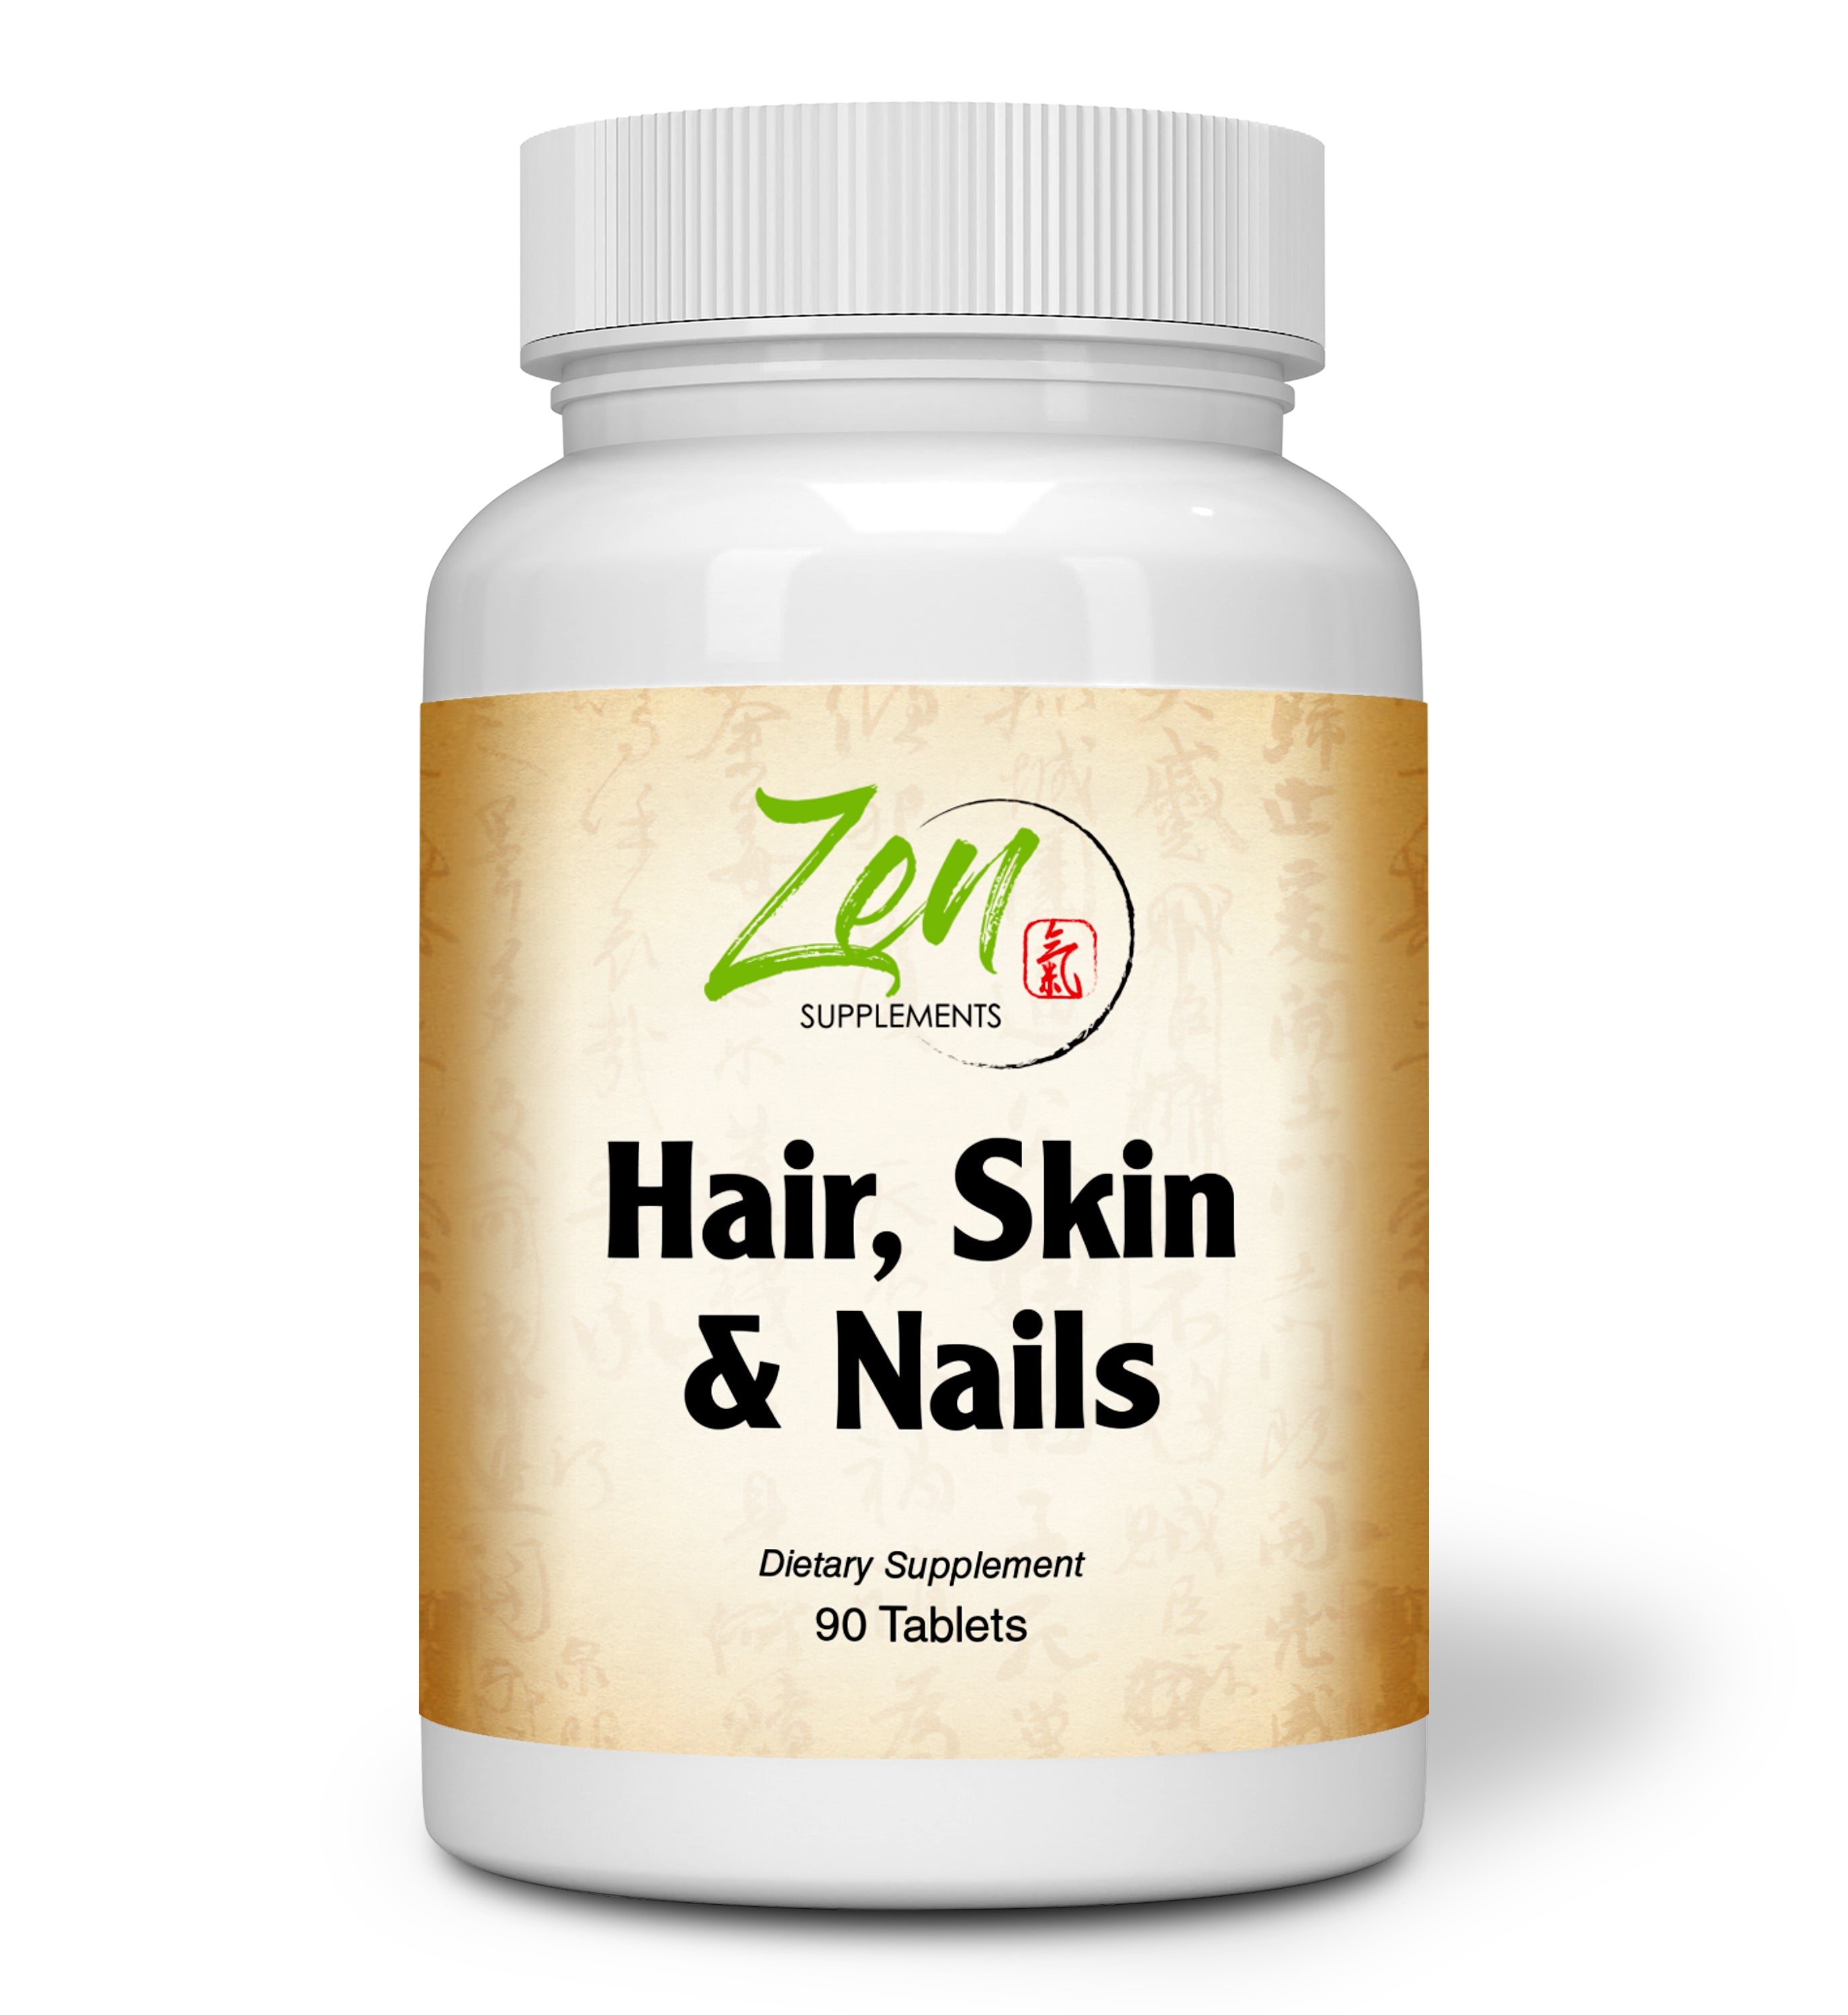 Zen Supplements - Hair, Skin & Nails Formula Contains Biotin, Zinc, MSM, Antioxidant Vitamins C and E, Selenium, Silicon All Support for Healthy Hair, Clear Skin and Strong Nails 90-Tabs